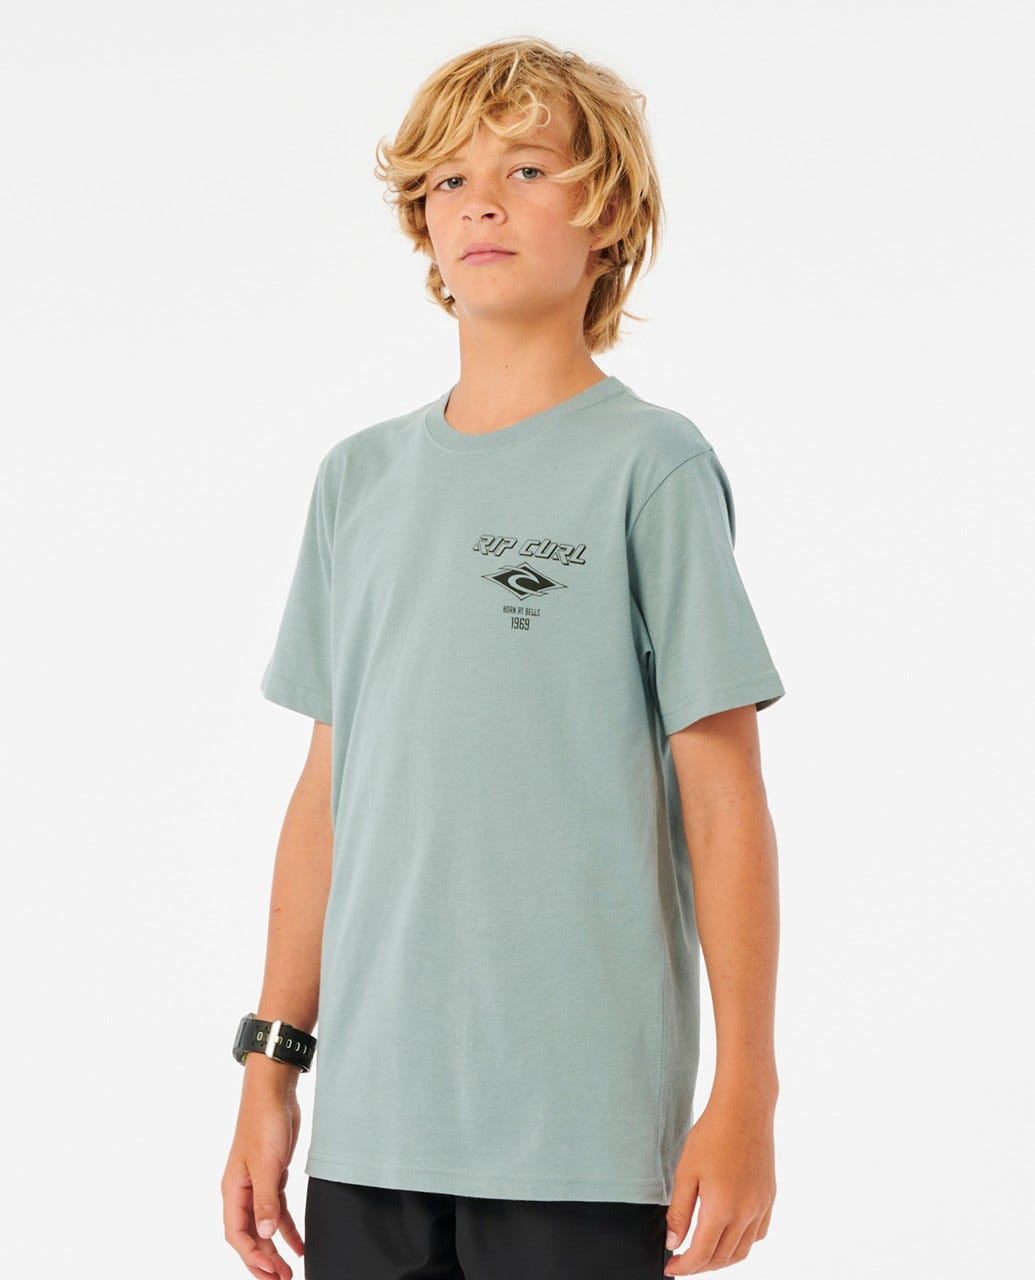 RIP CURL FADE OUT ICON KTESS9-4790 T-SHIRT SHORT SLEEVE (YB)